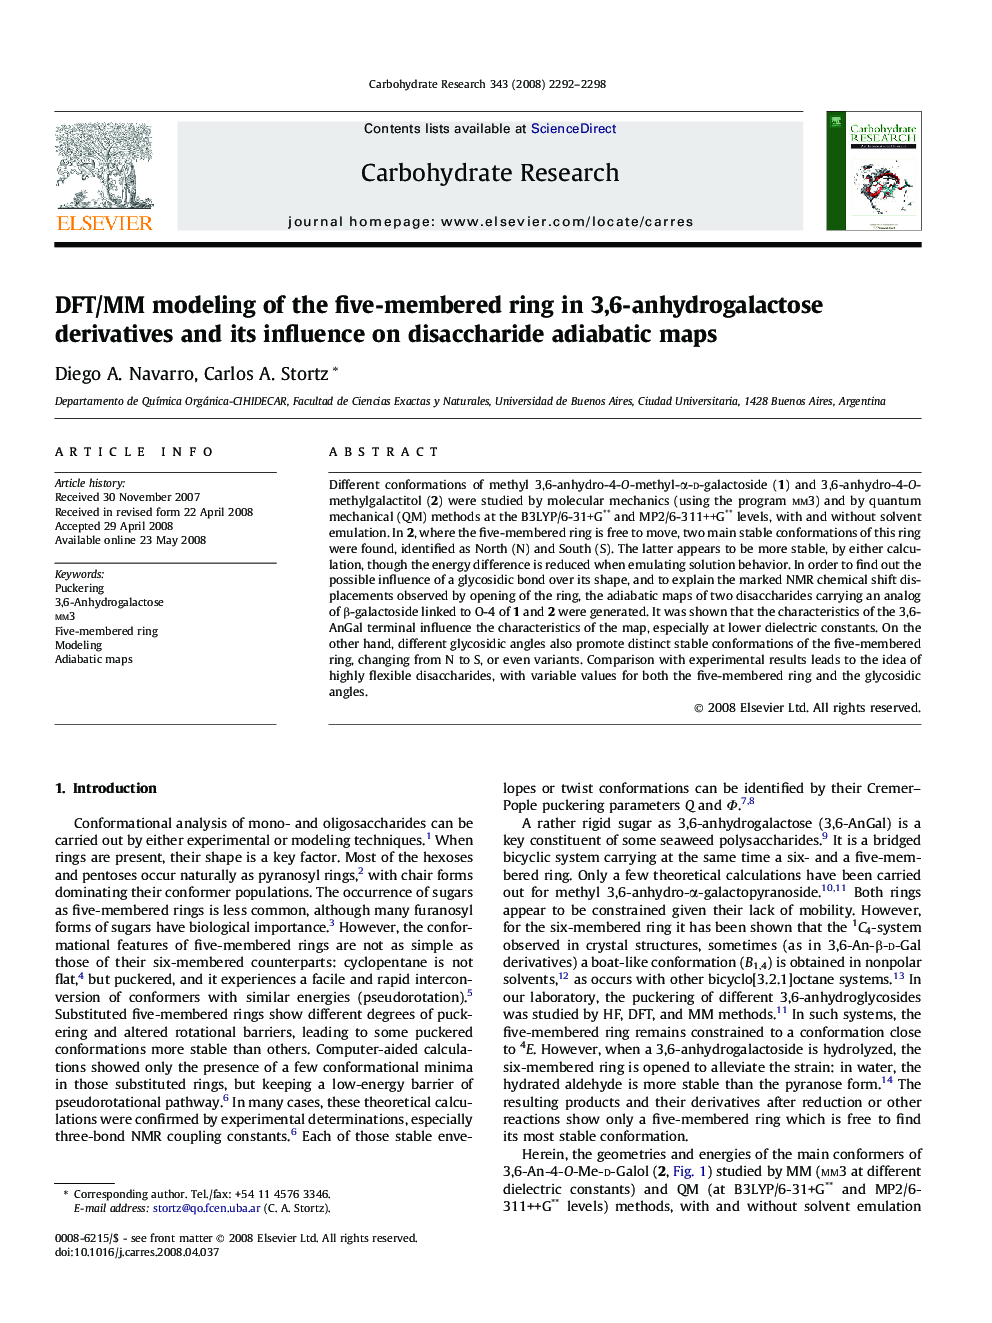 DFT/MM modeling of the five-membered ring in 3,6-anhydrogalactose derivatives and its influence on disaccharide adiabatic maps